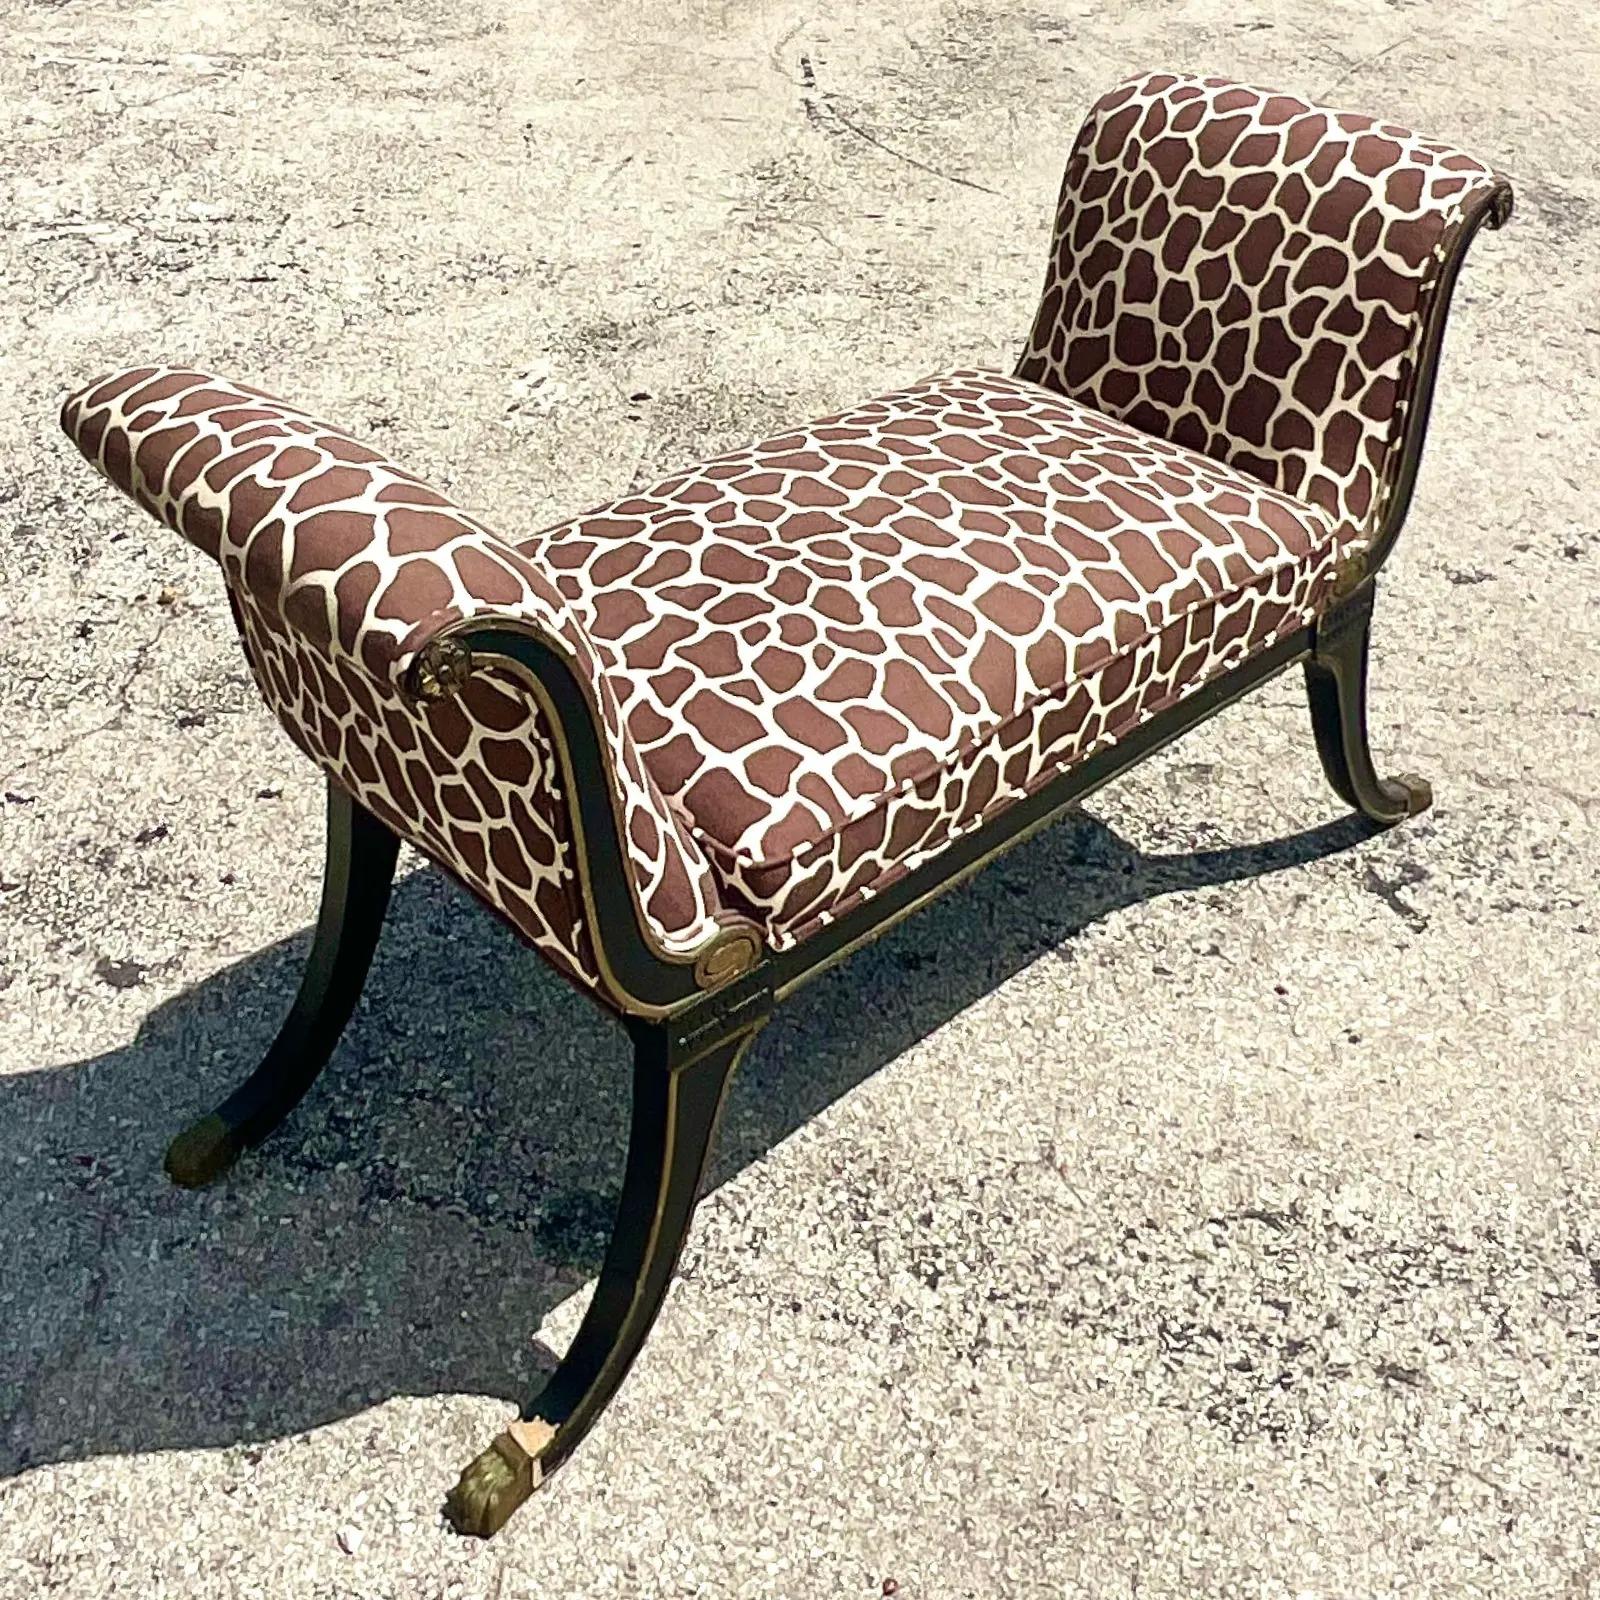 A fabulous vintage upholstered bench. A chic contemporary Kelly Wearstler For Groundworks giraffe print on a glamorous high sided frame. Lots of great patina to the paint from time. A glamorous little addition to any room. Acquired from a Palm Beach